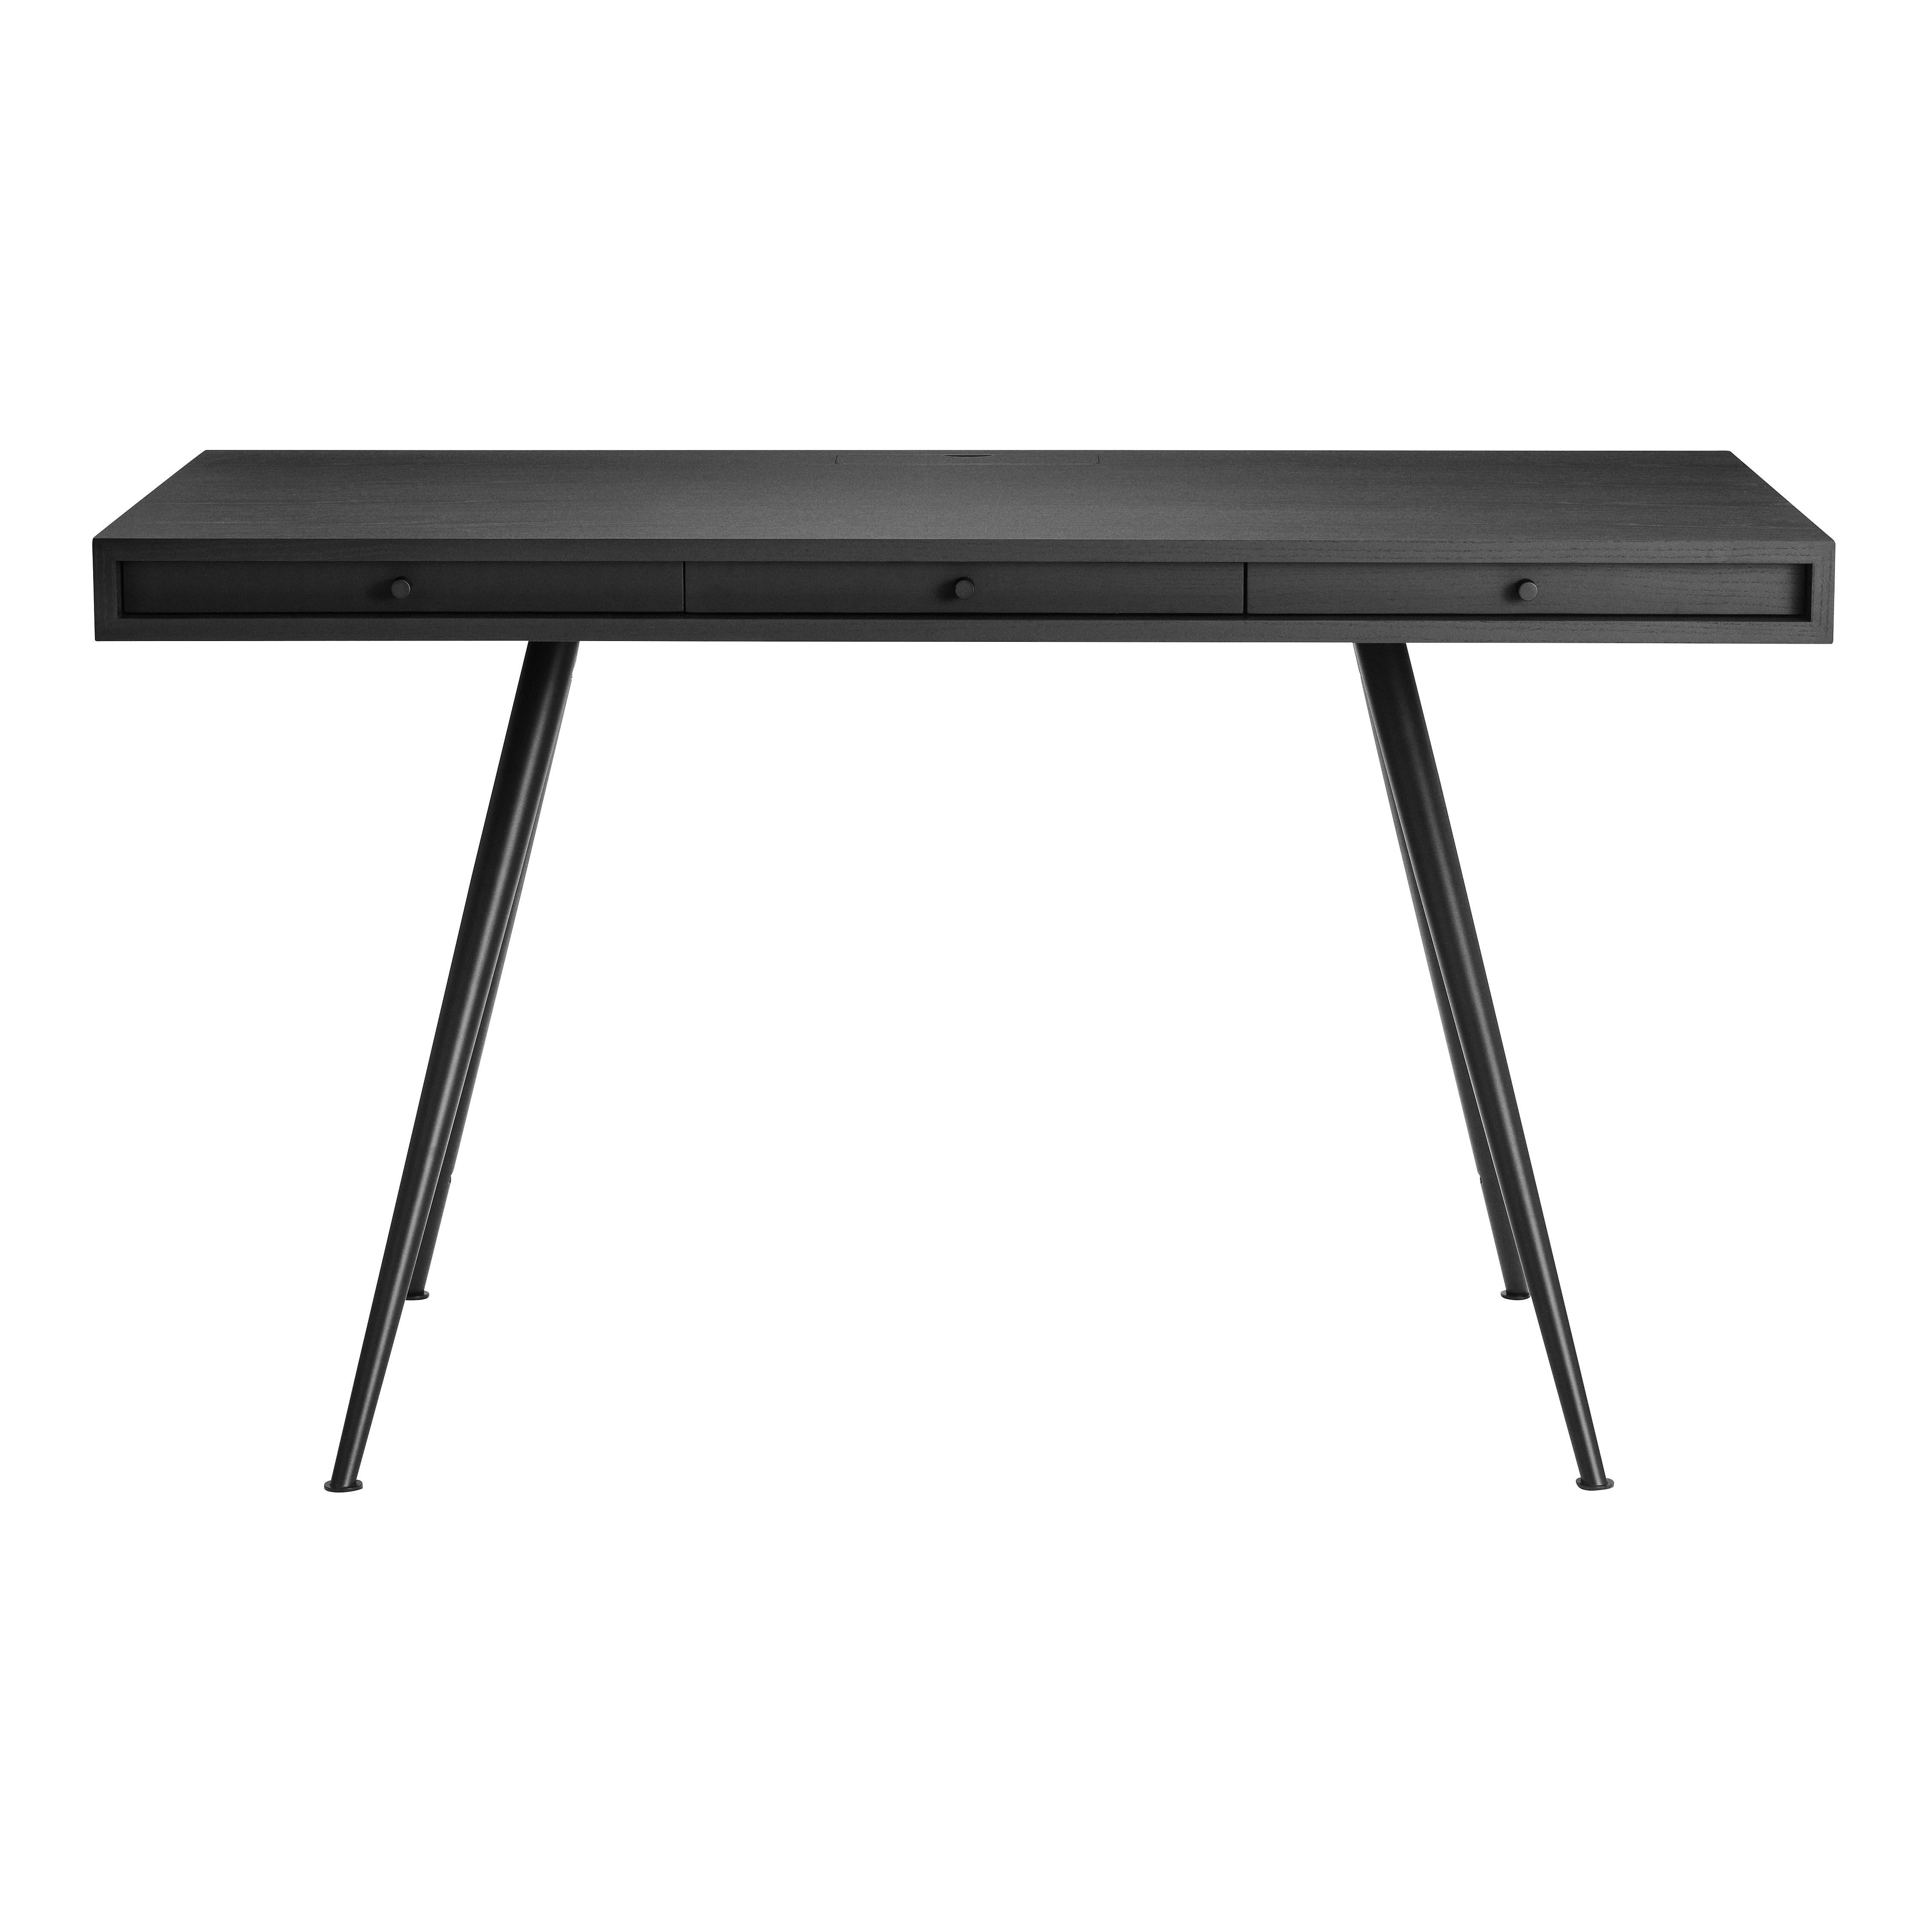 With its pure and simplistic design the 1960s inspired JFK Desk is designed for the stylish home office. The desk has a slim table top of ash veneer with three inbuilt drawers and stands elegantly positioned on top of four conic shaped black powder